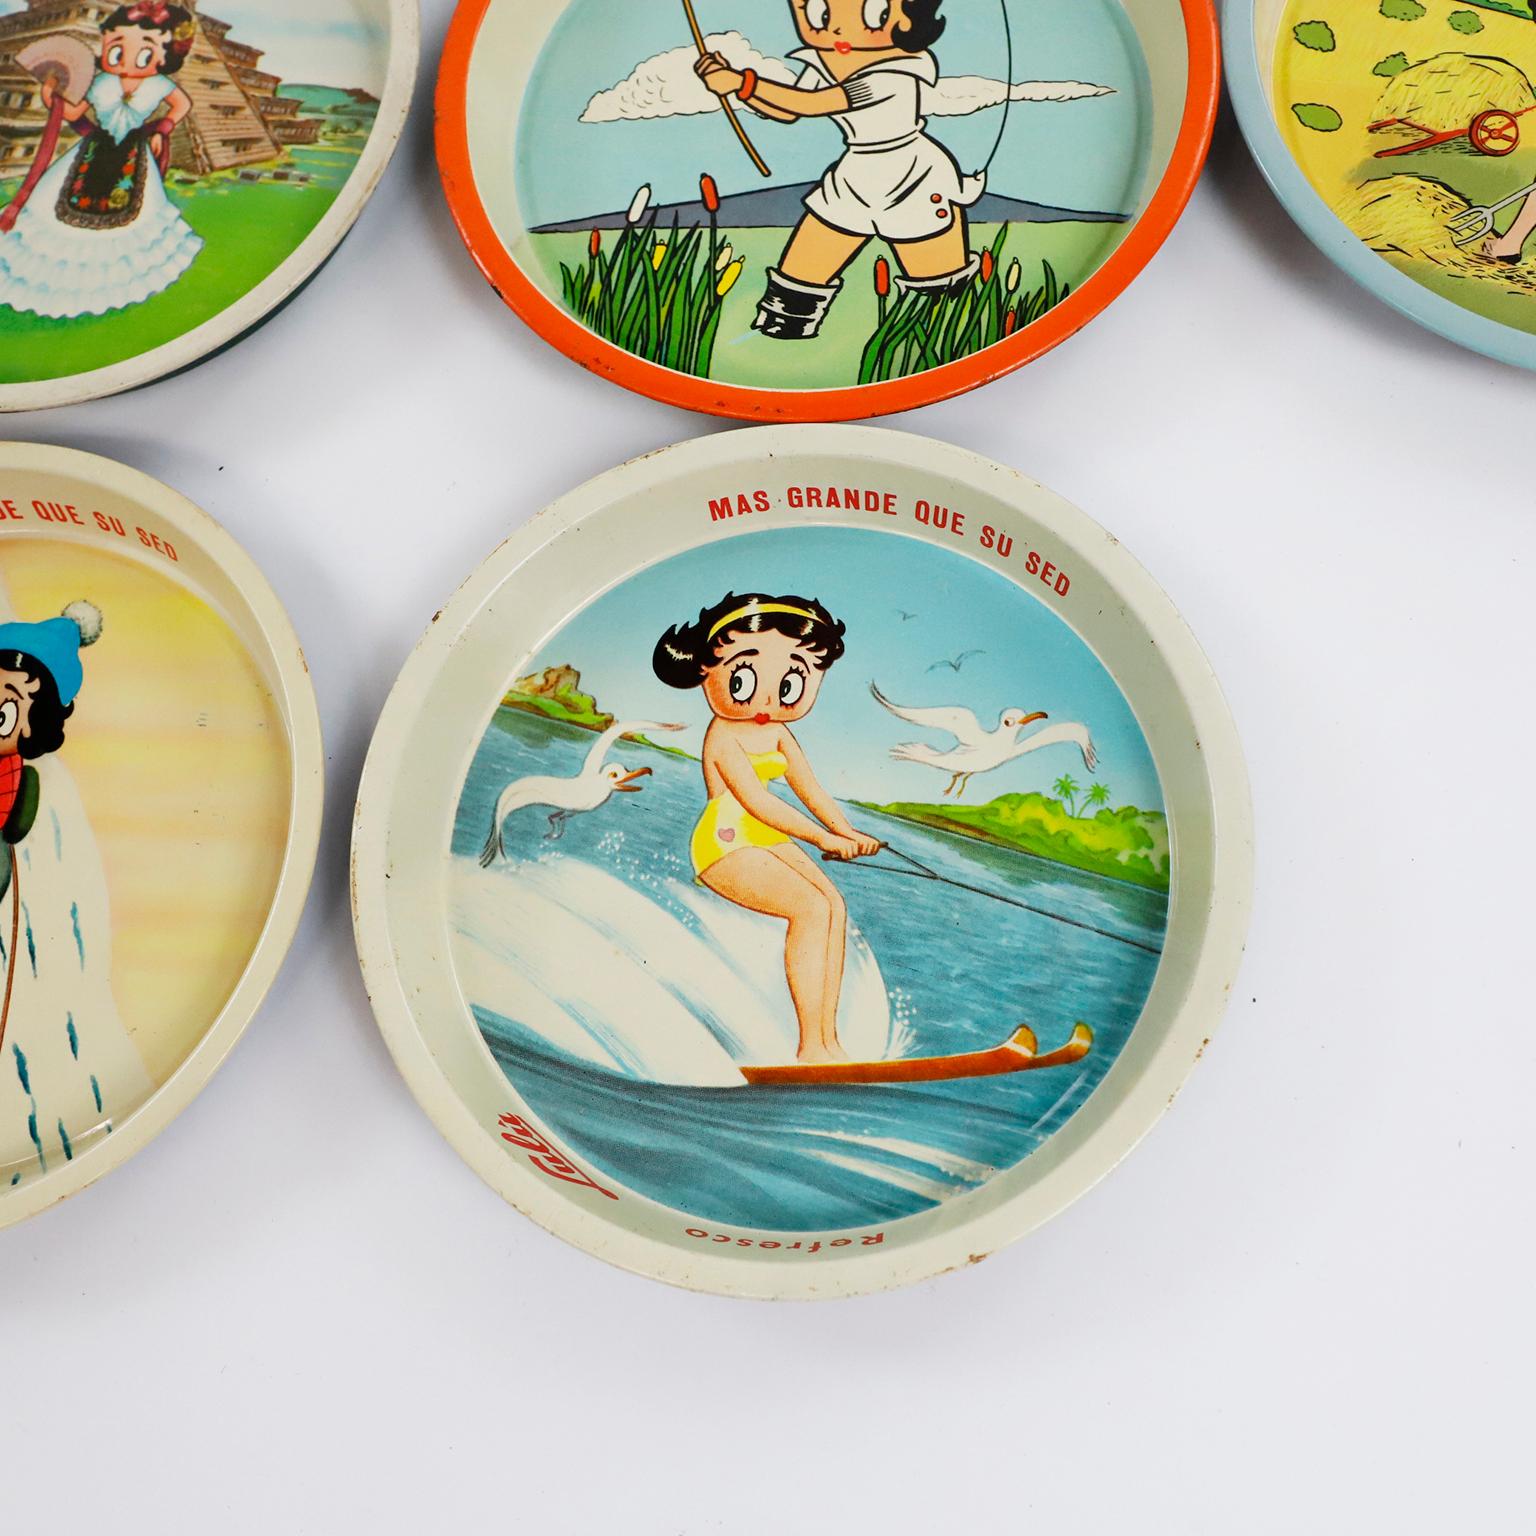 We offer this Fantastic collection of 34 vintage mexicano betty boop lulu steel soda trays.

About 